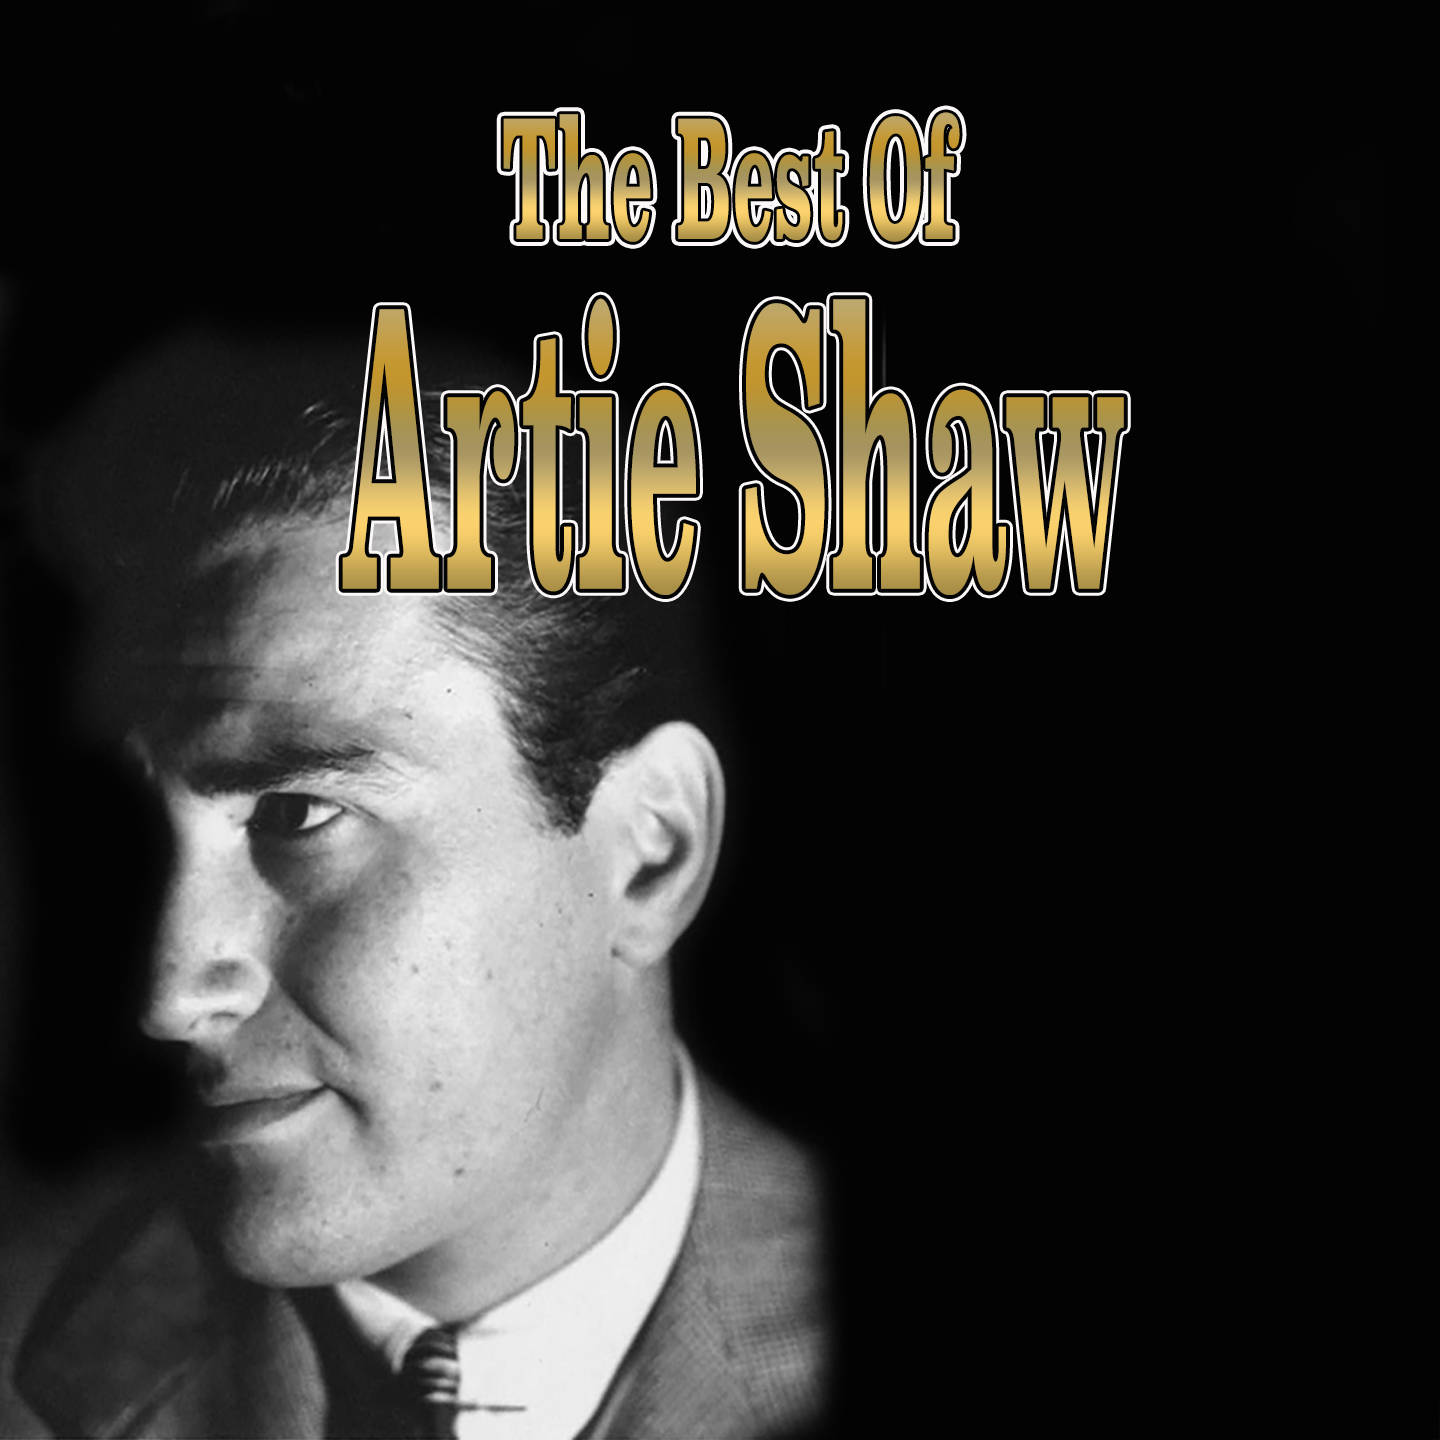 The Best Of Artie Shaw Poster Wallpaper